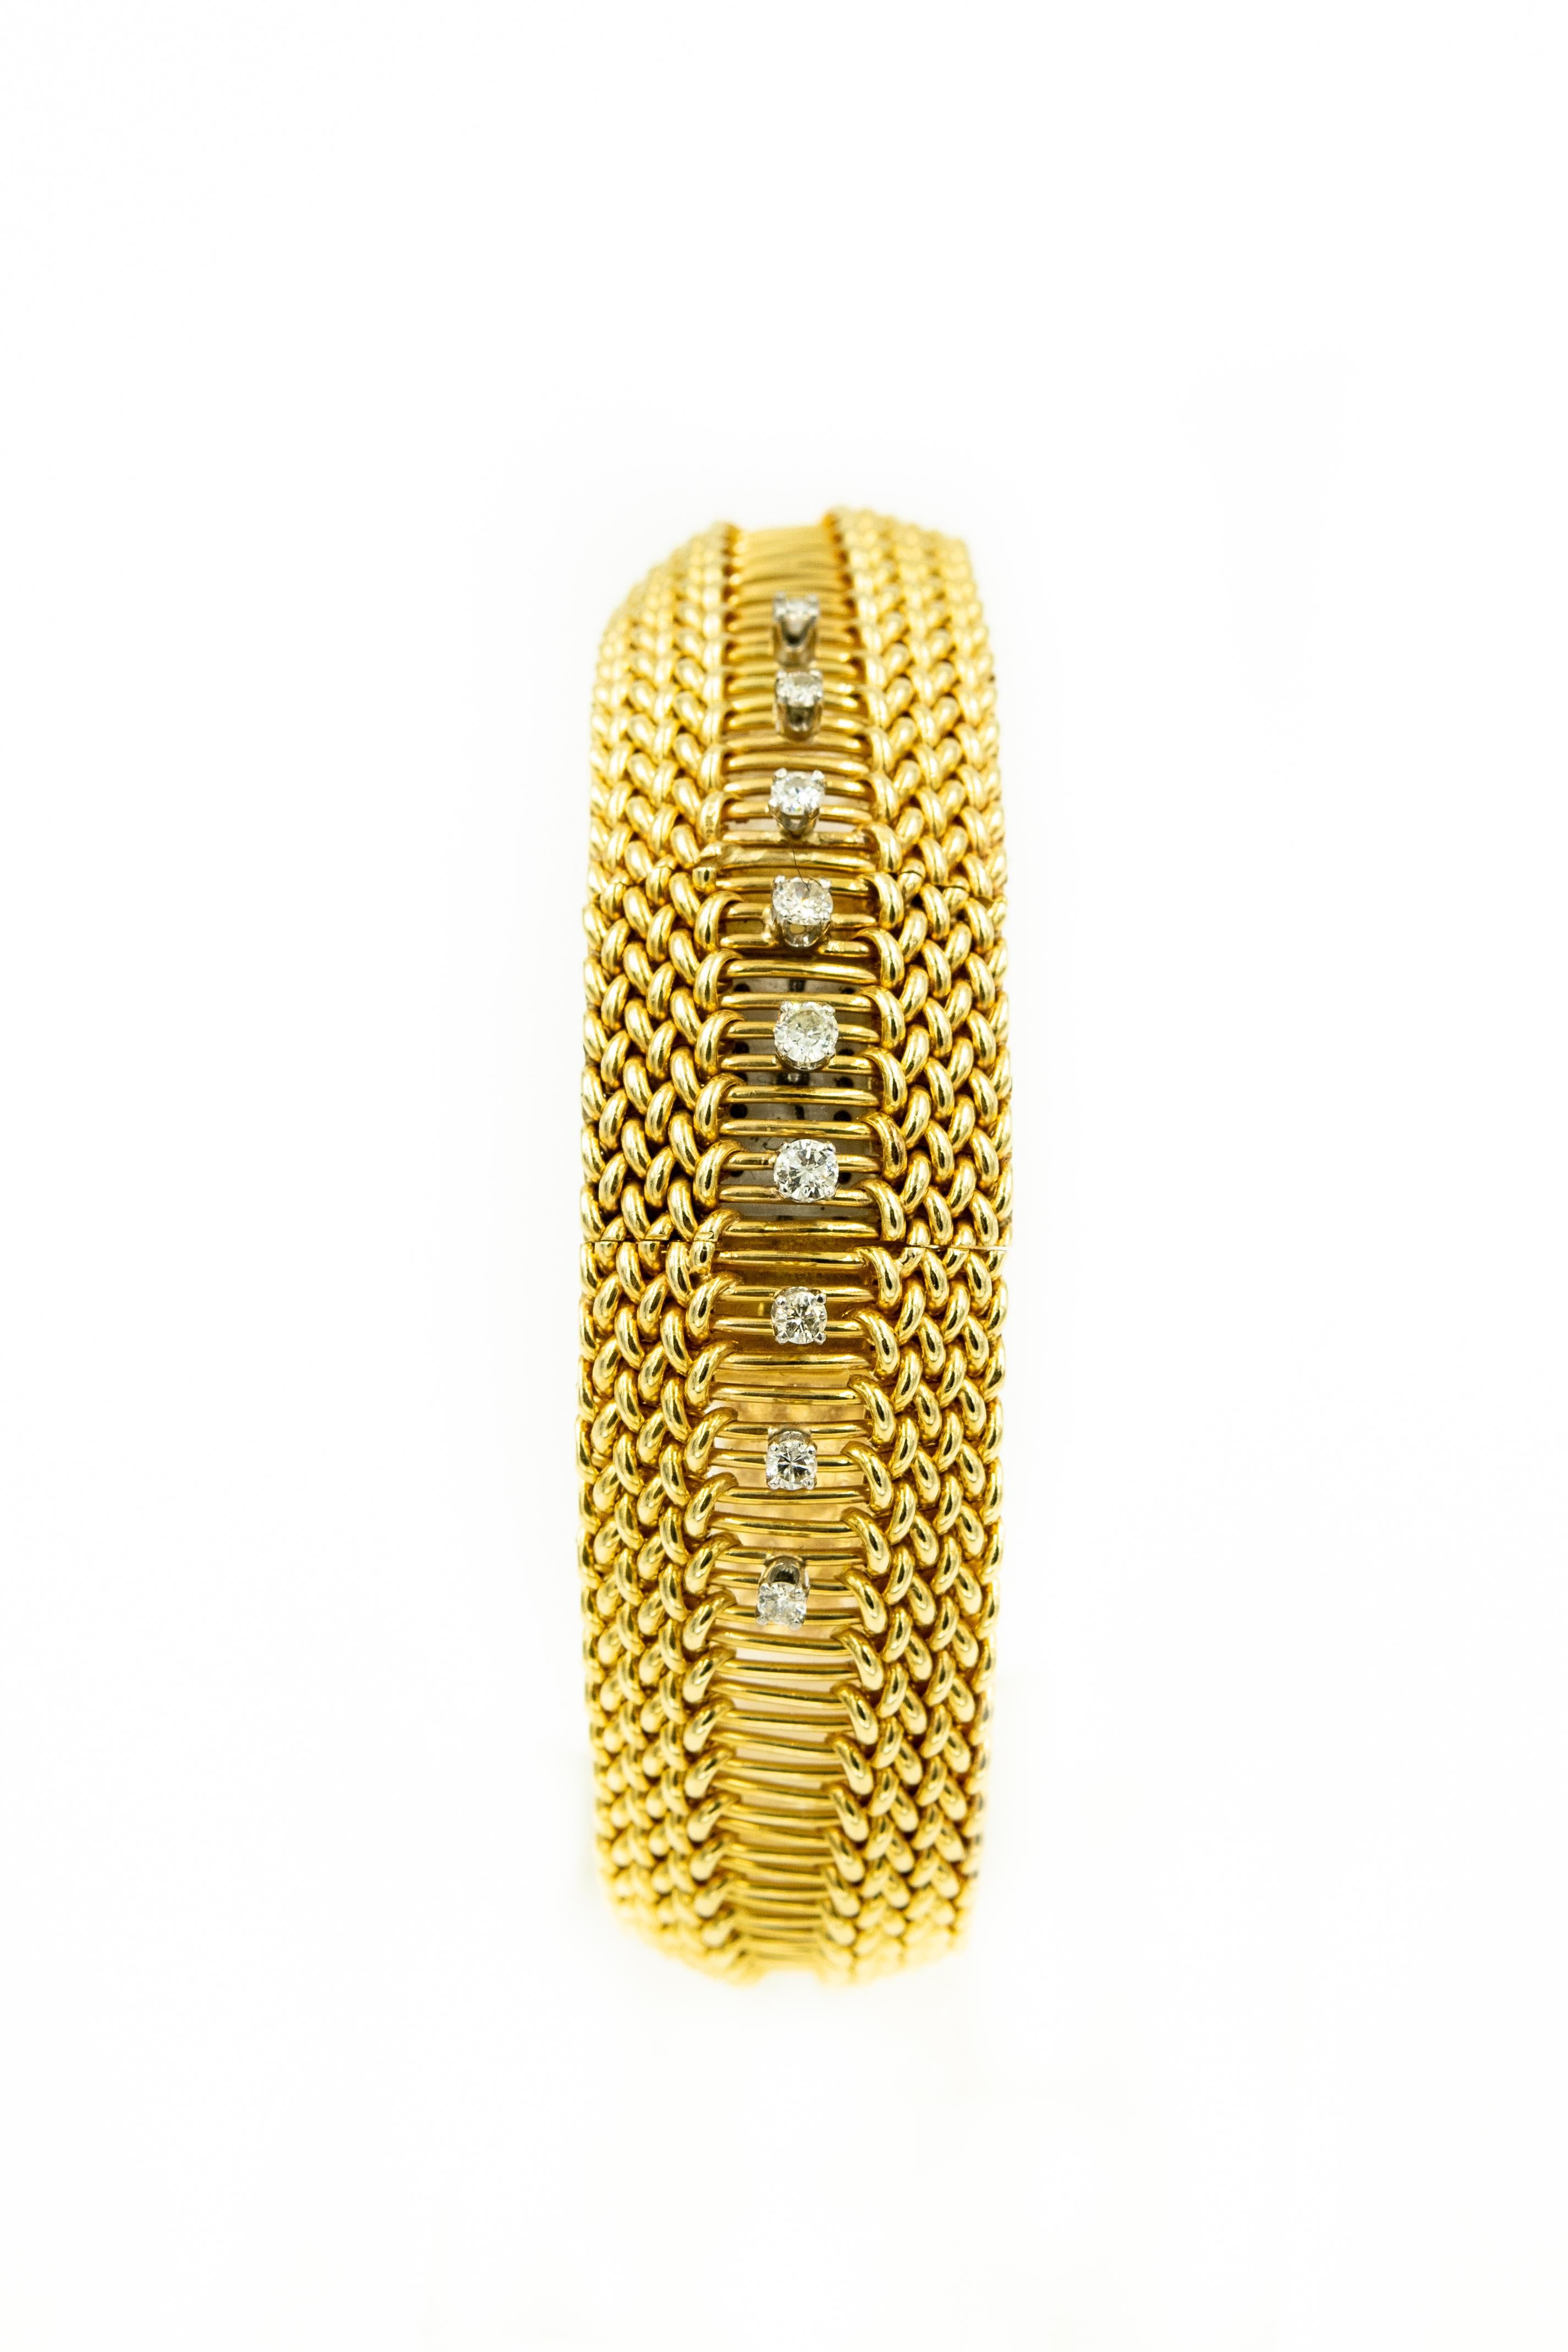 Elegant covered 14k yellow gold woven ladies watch with 9 prong set diamonds going in a line from top to bottom.  The approximate total diamond weight is .36 carats.  The cover hinges from the side and opens to reveal the dial says which says King's